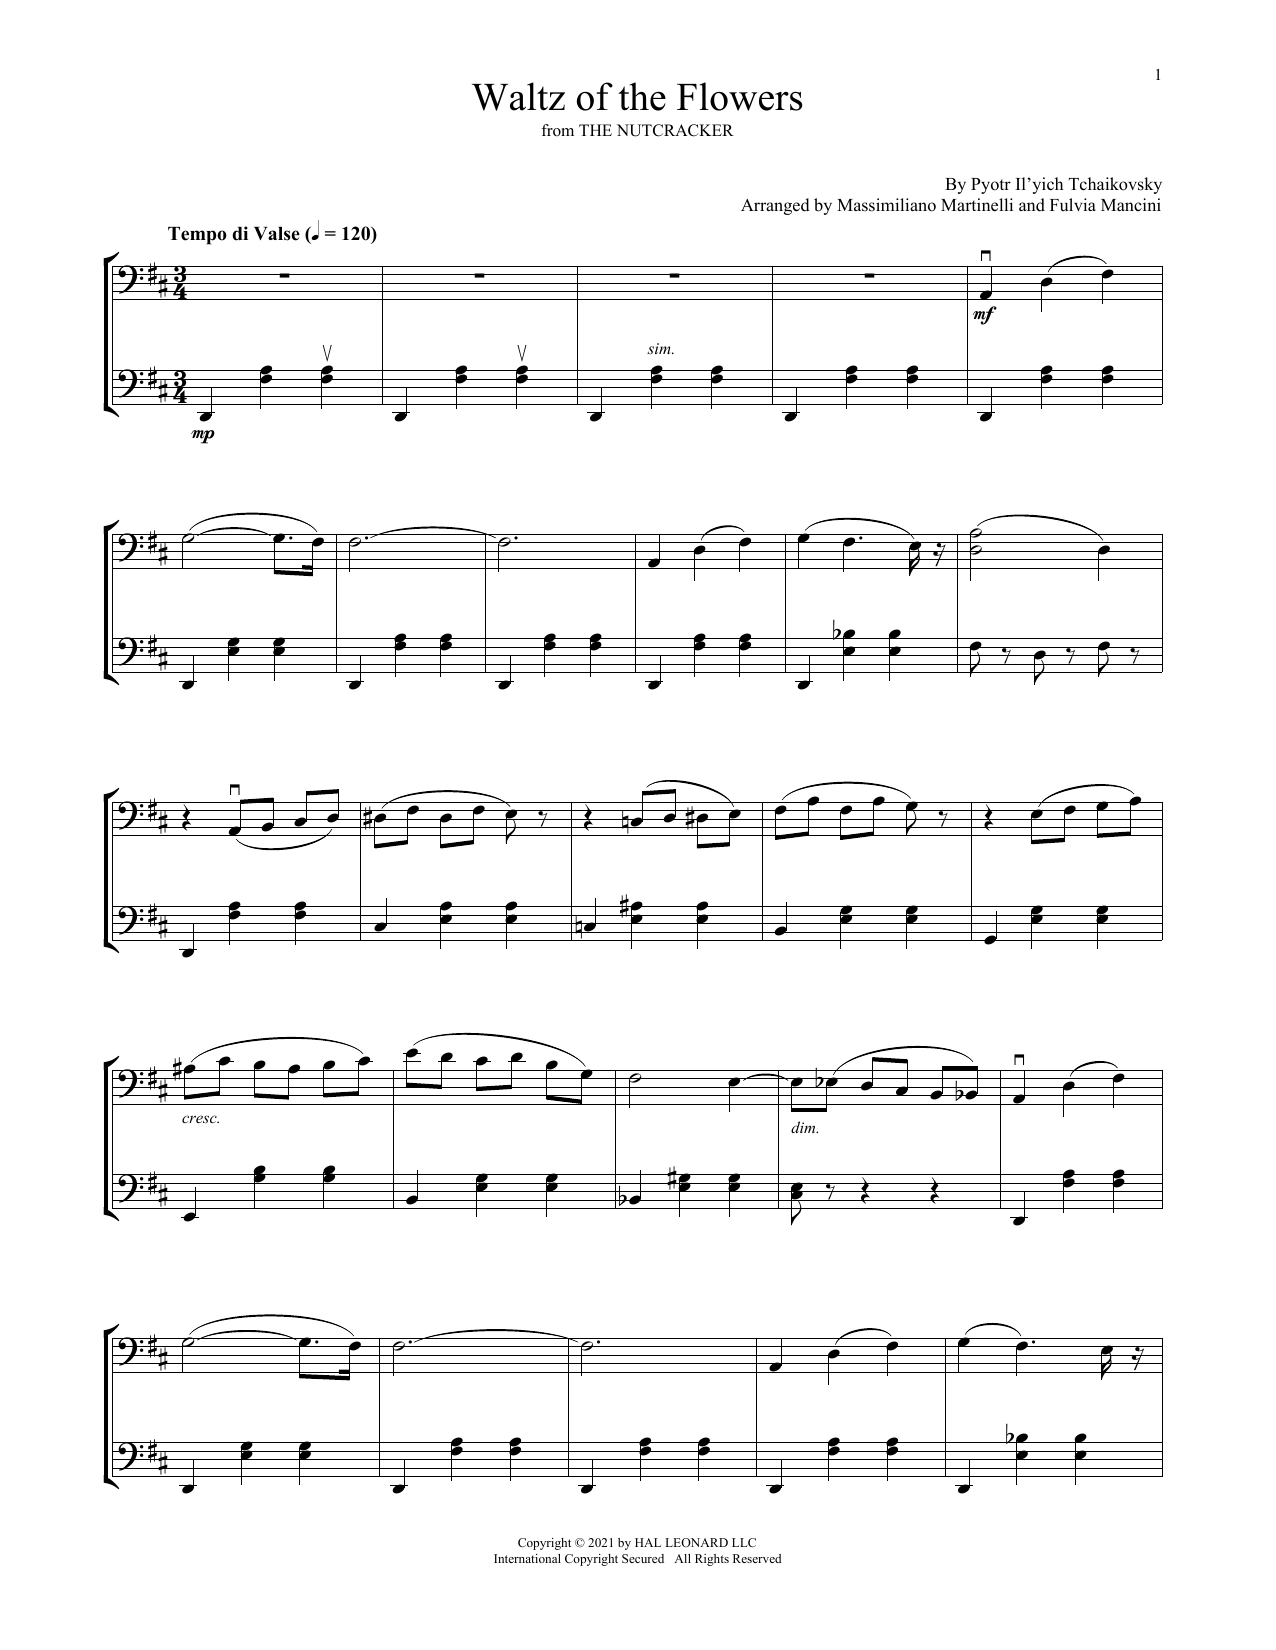 Download Mr & Mrs Cello Waltz Of The Flowers (from The Nutcrack Sheet Music